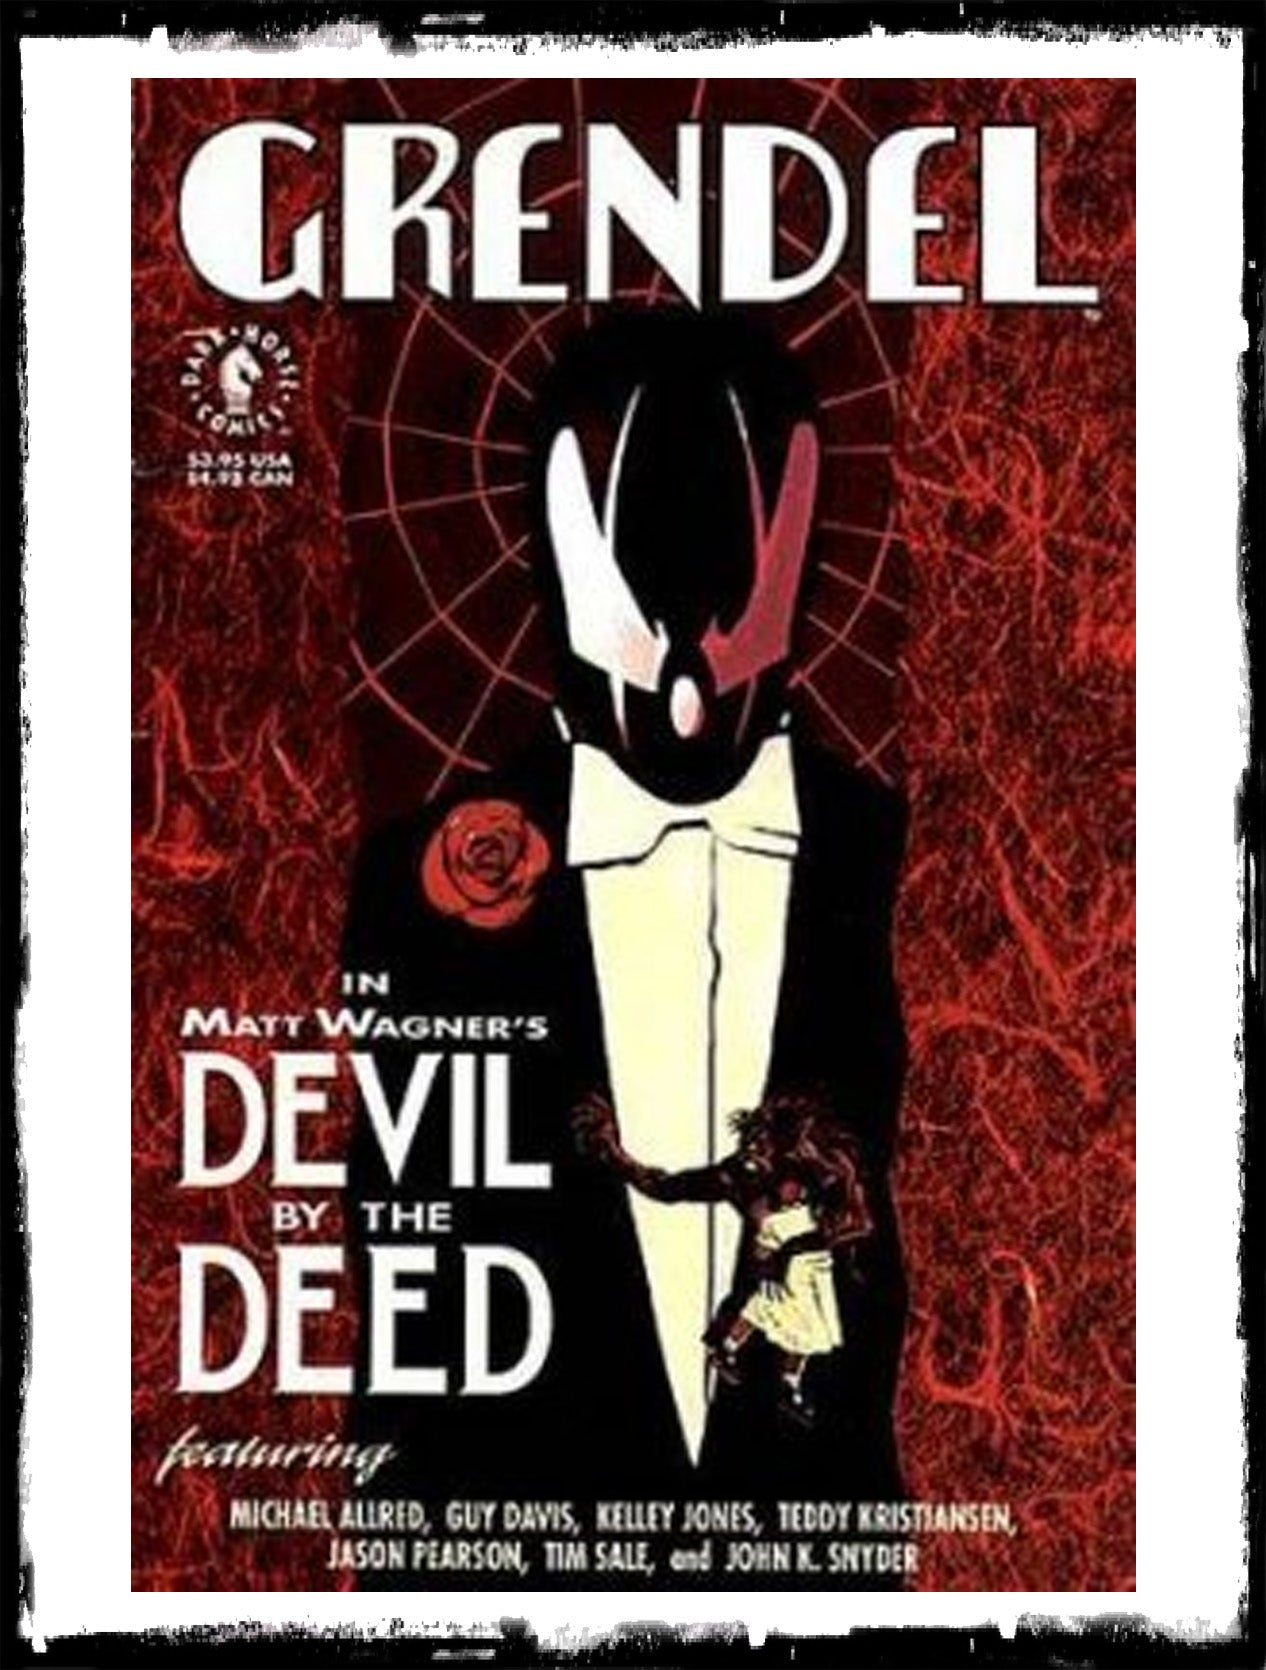 GRENDEL: DEVIL BY THE DEED - #1 CLASSIC GRENDEL ONE-SHOT (1993 - NM)